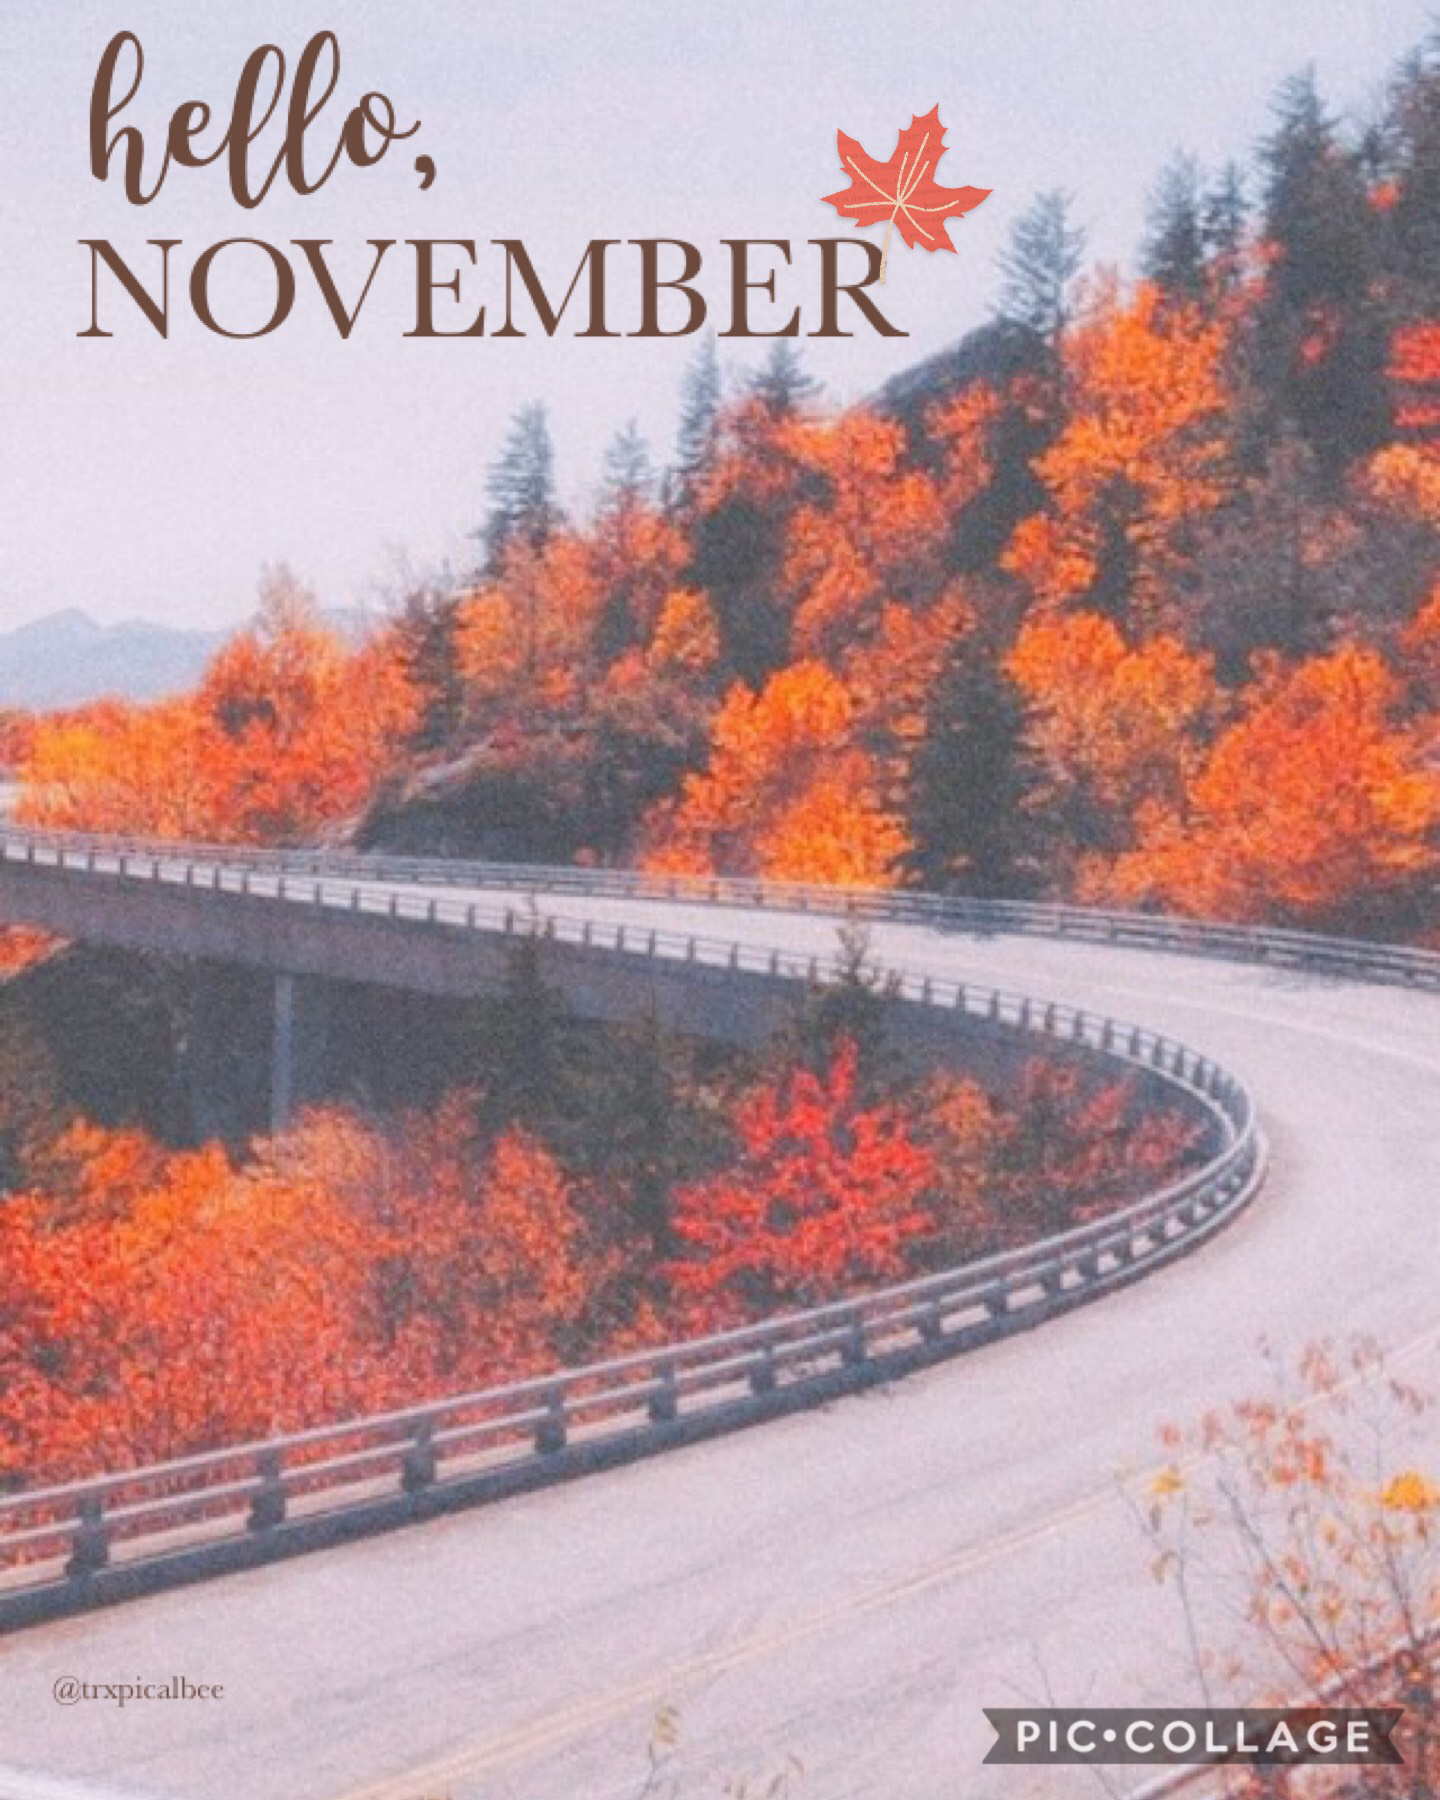 hello, november! 🍂 it’s almost christmas! :))

[looks like i’m back for a bit! ✨]